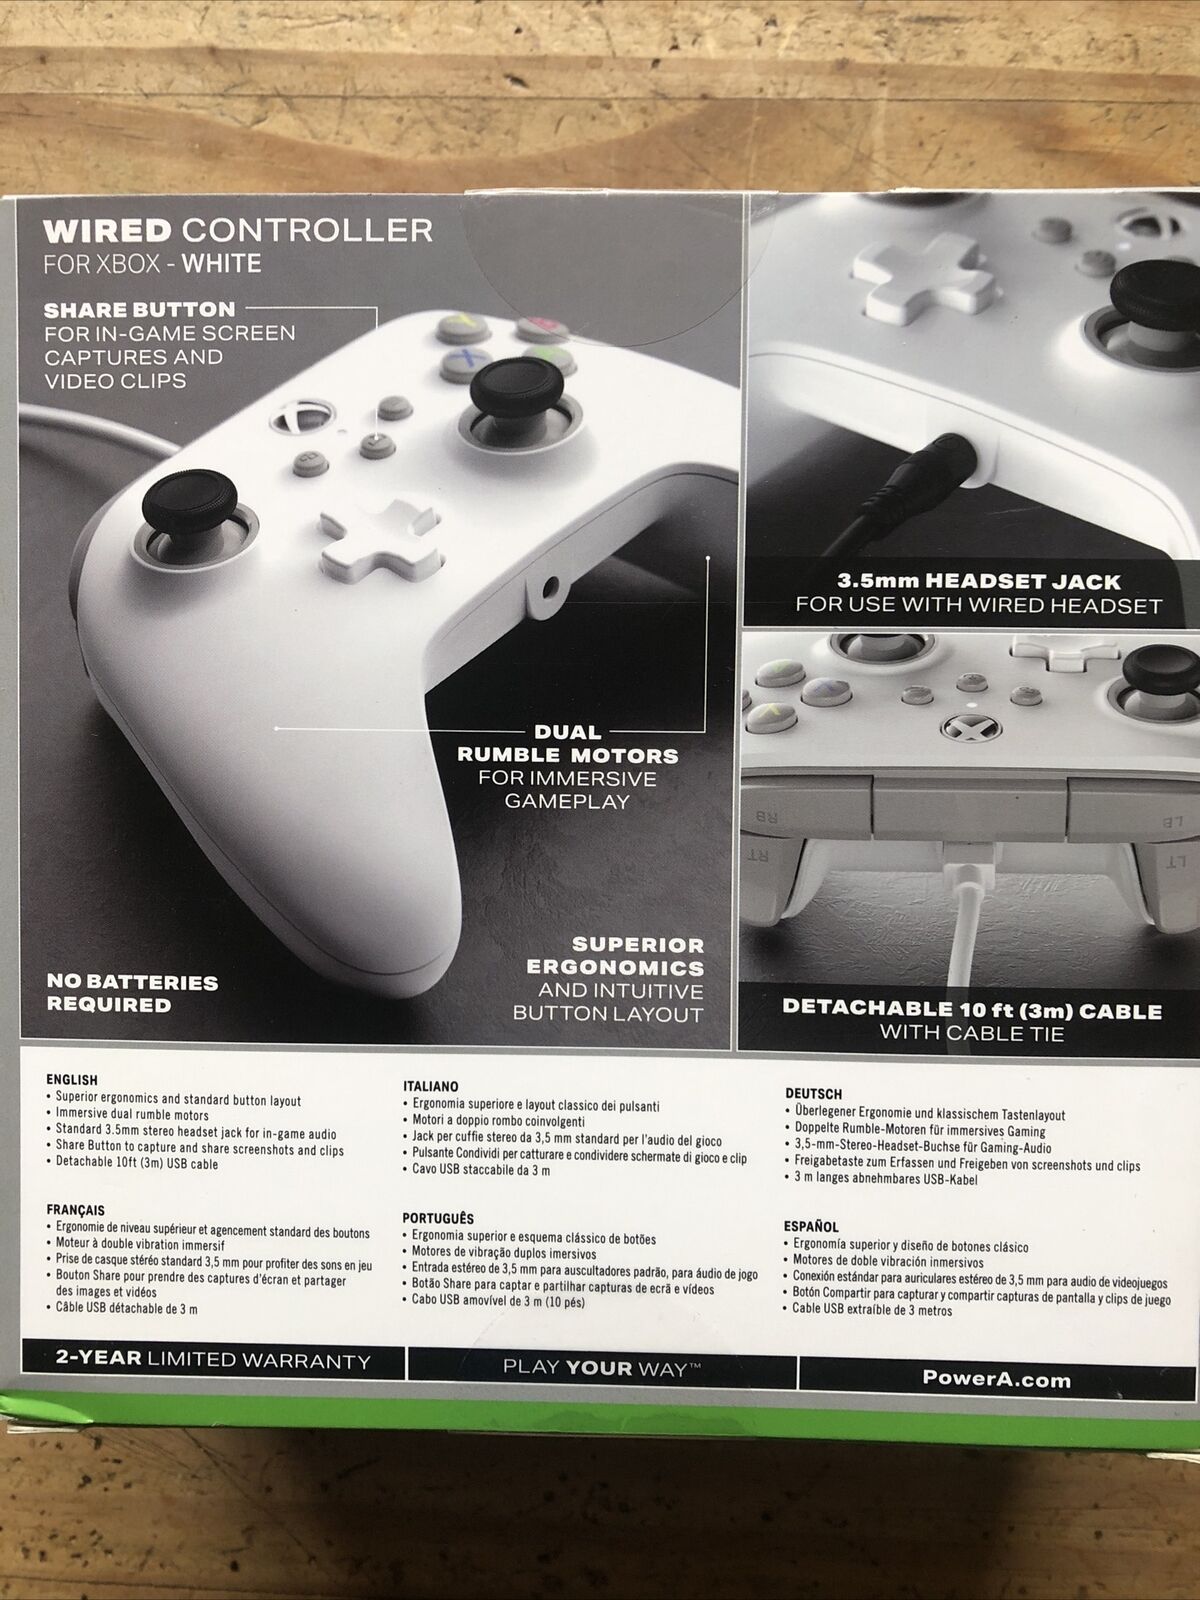 Wired Controller For Xbox Series X|S - White, Gamepad, Wired Video Game